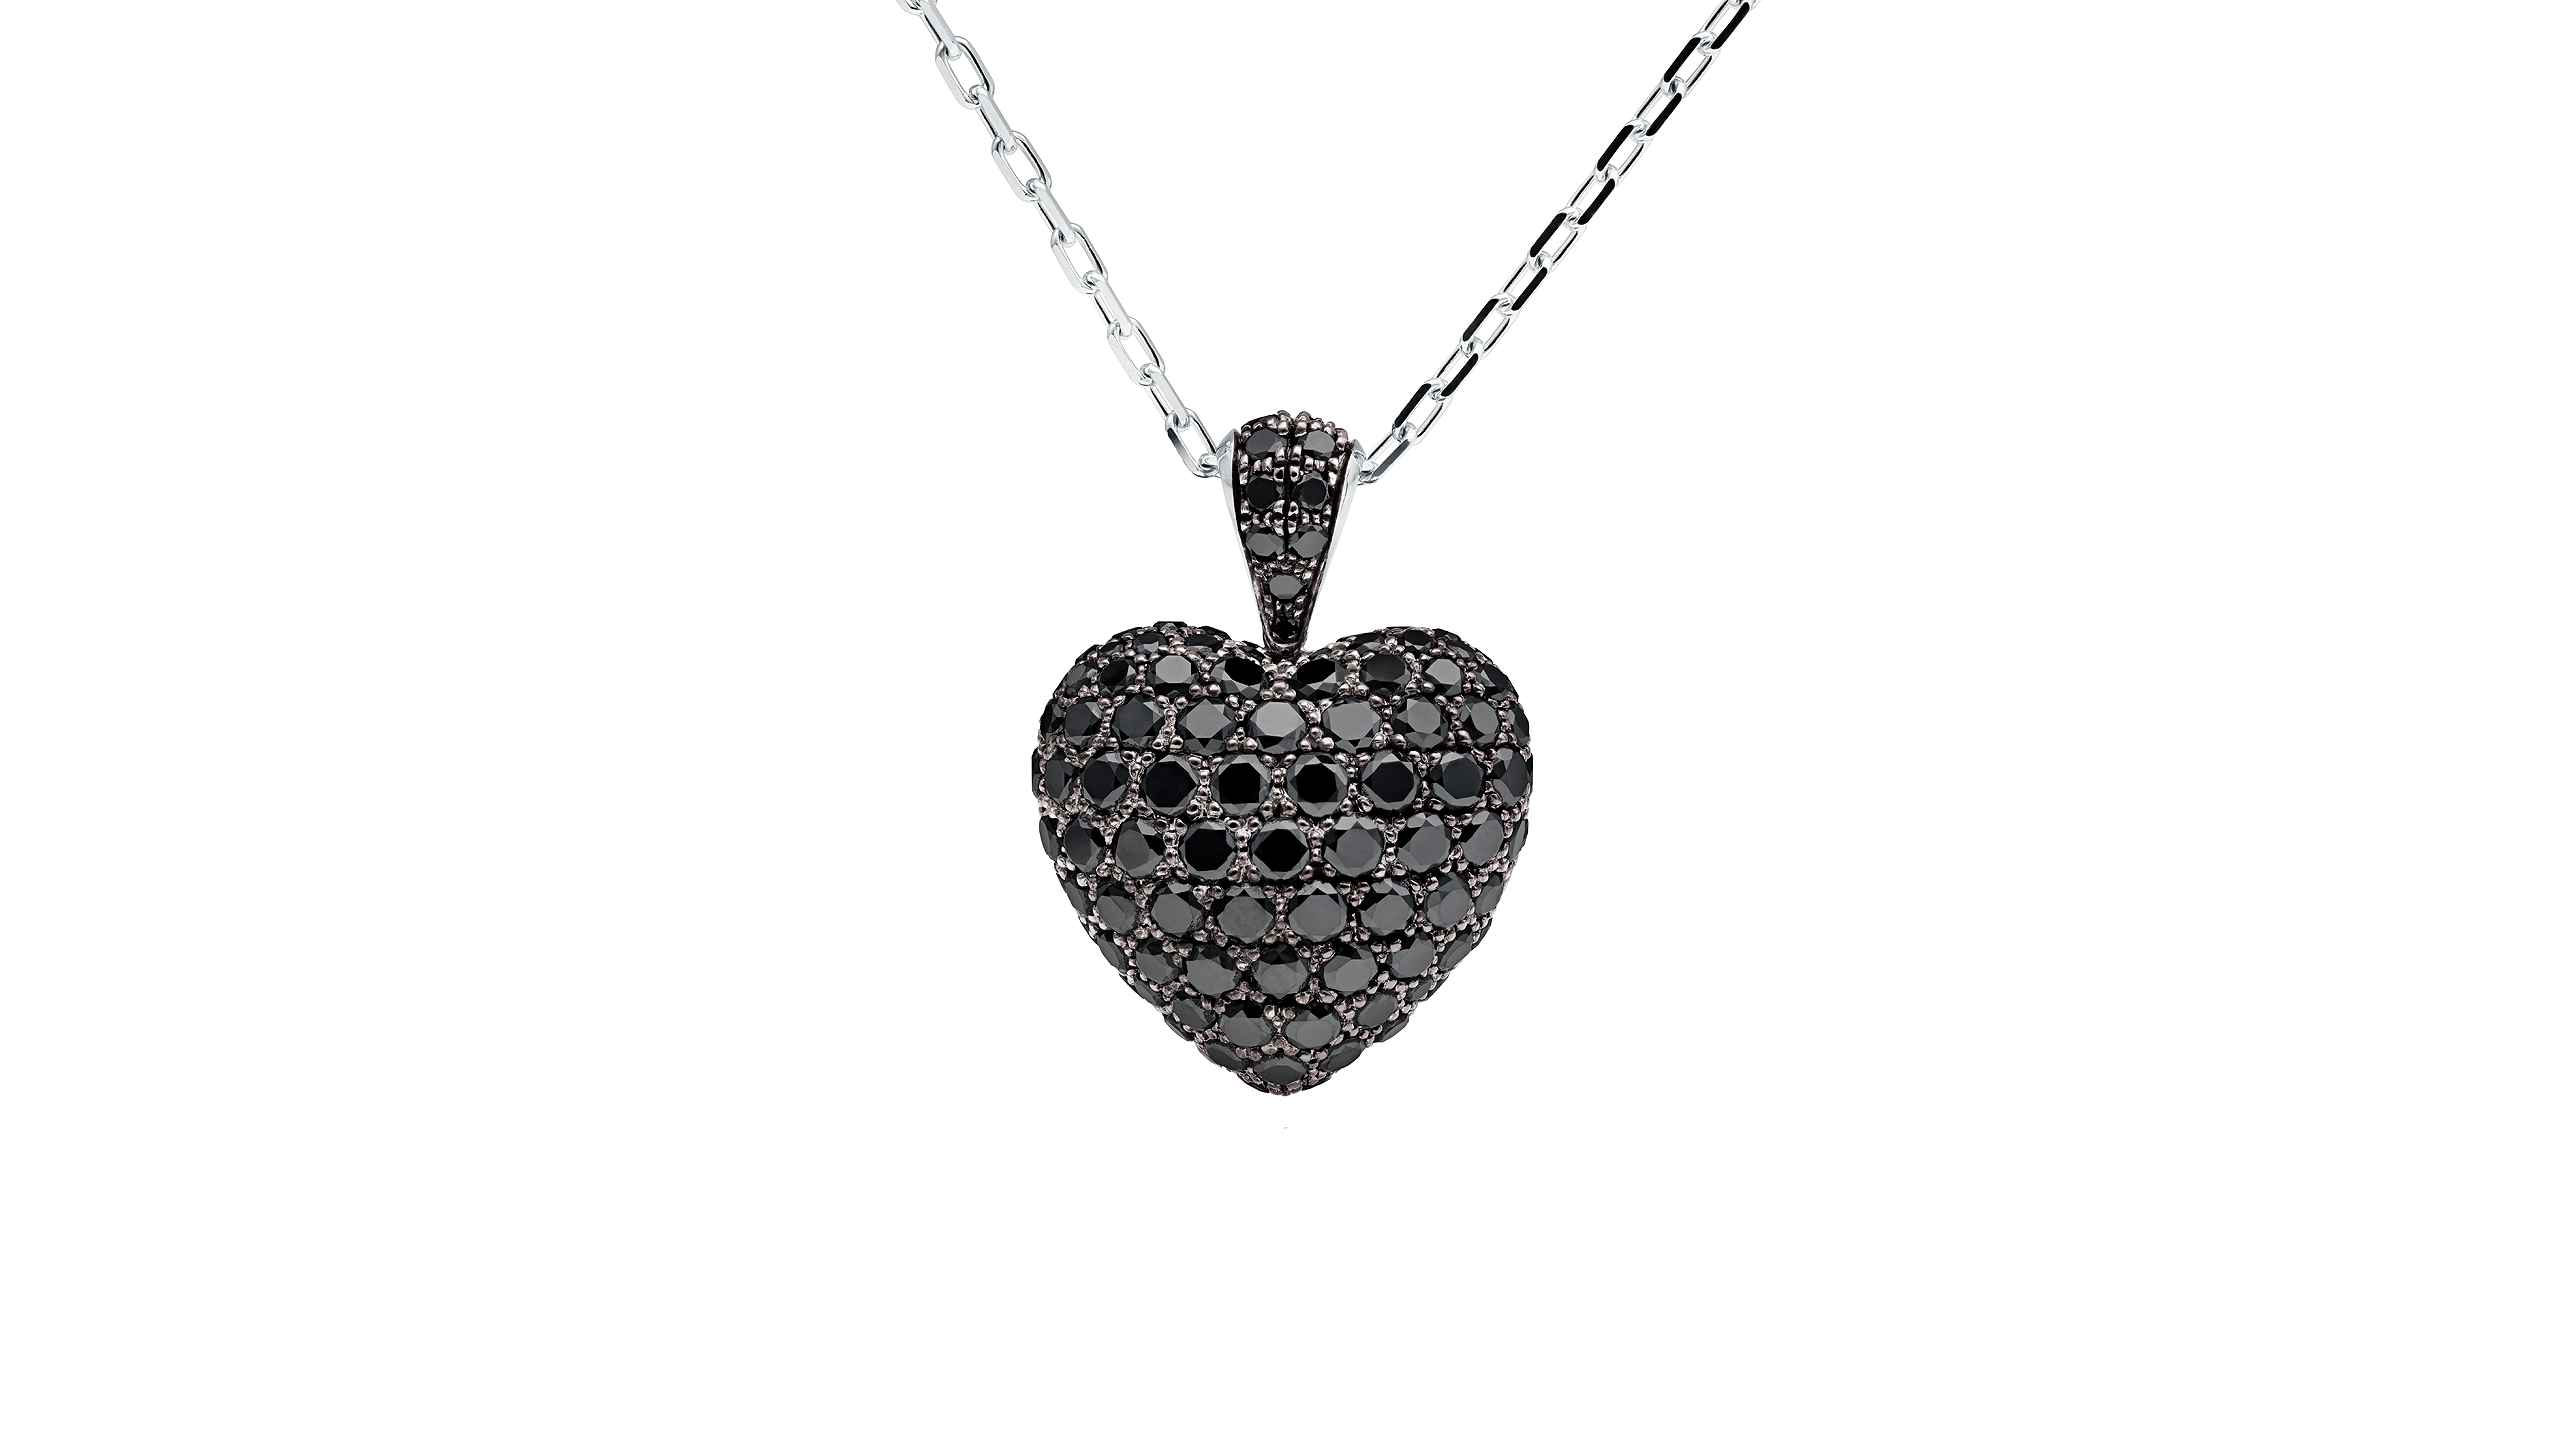 https://towejewels.com/wp-content/uploads/2015/01/black_diamond_heart_small_ny_OK_2560x1440_overview_web.jpg